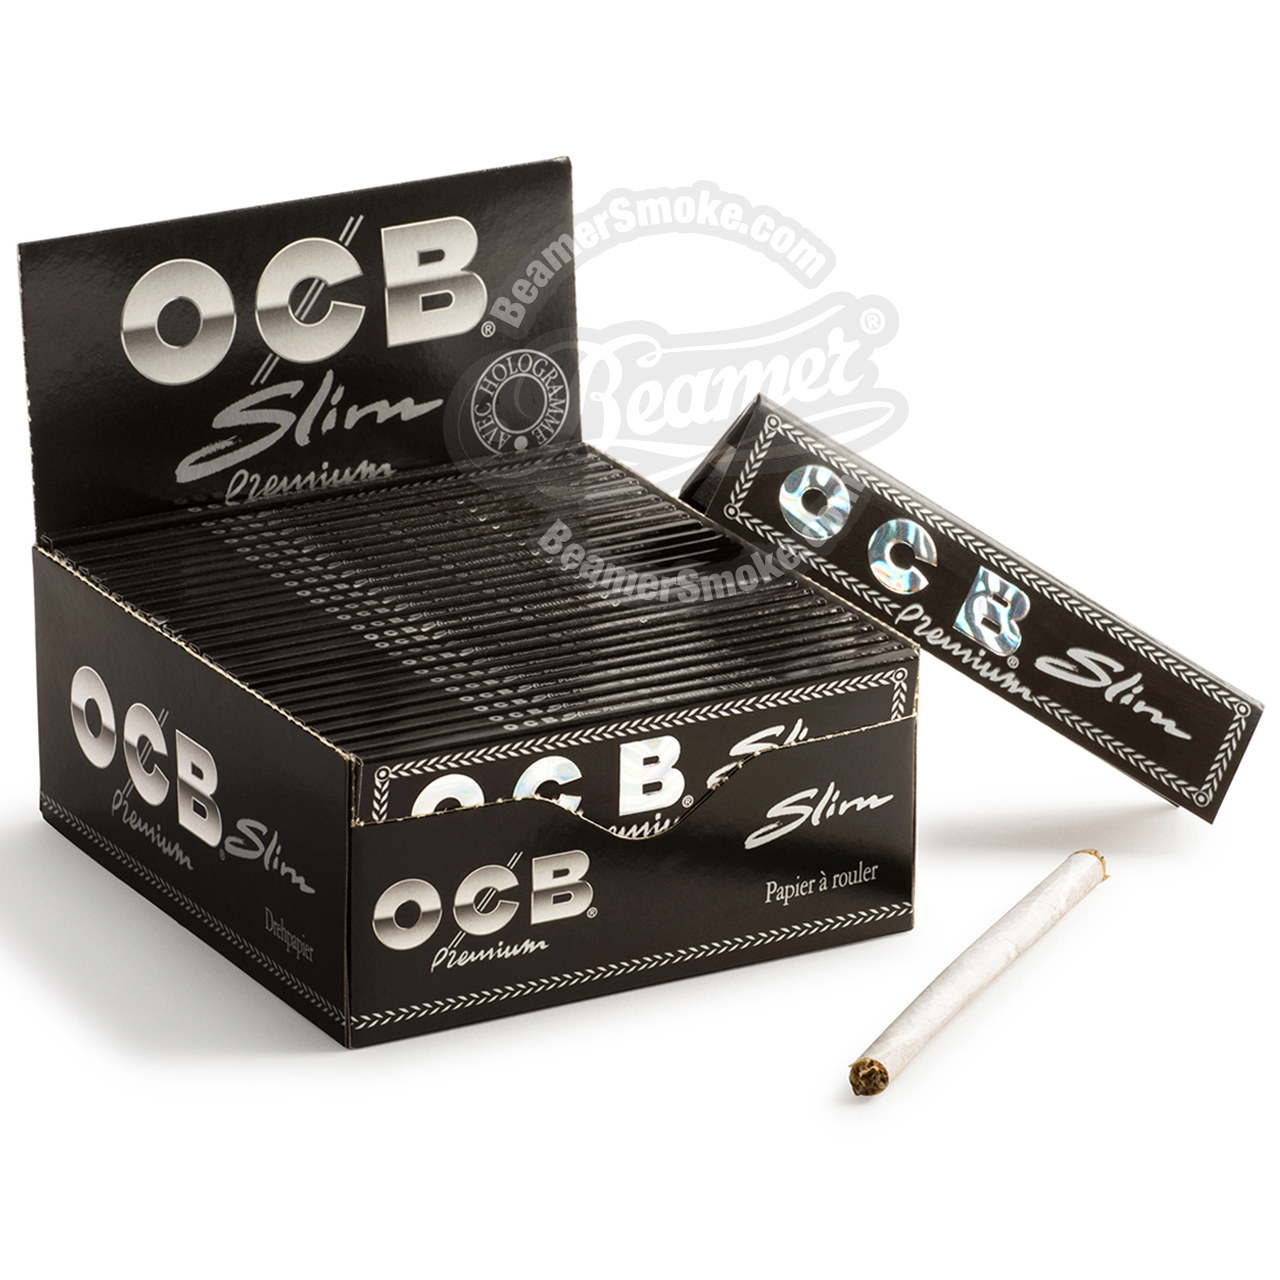 OCB Premium King Size Rolling Papers